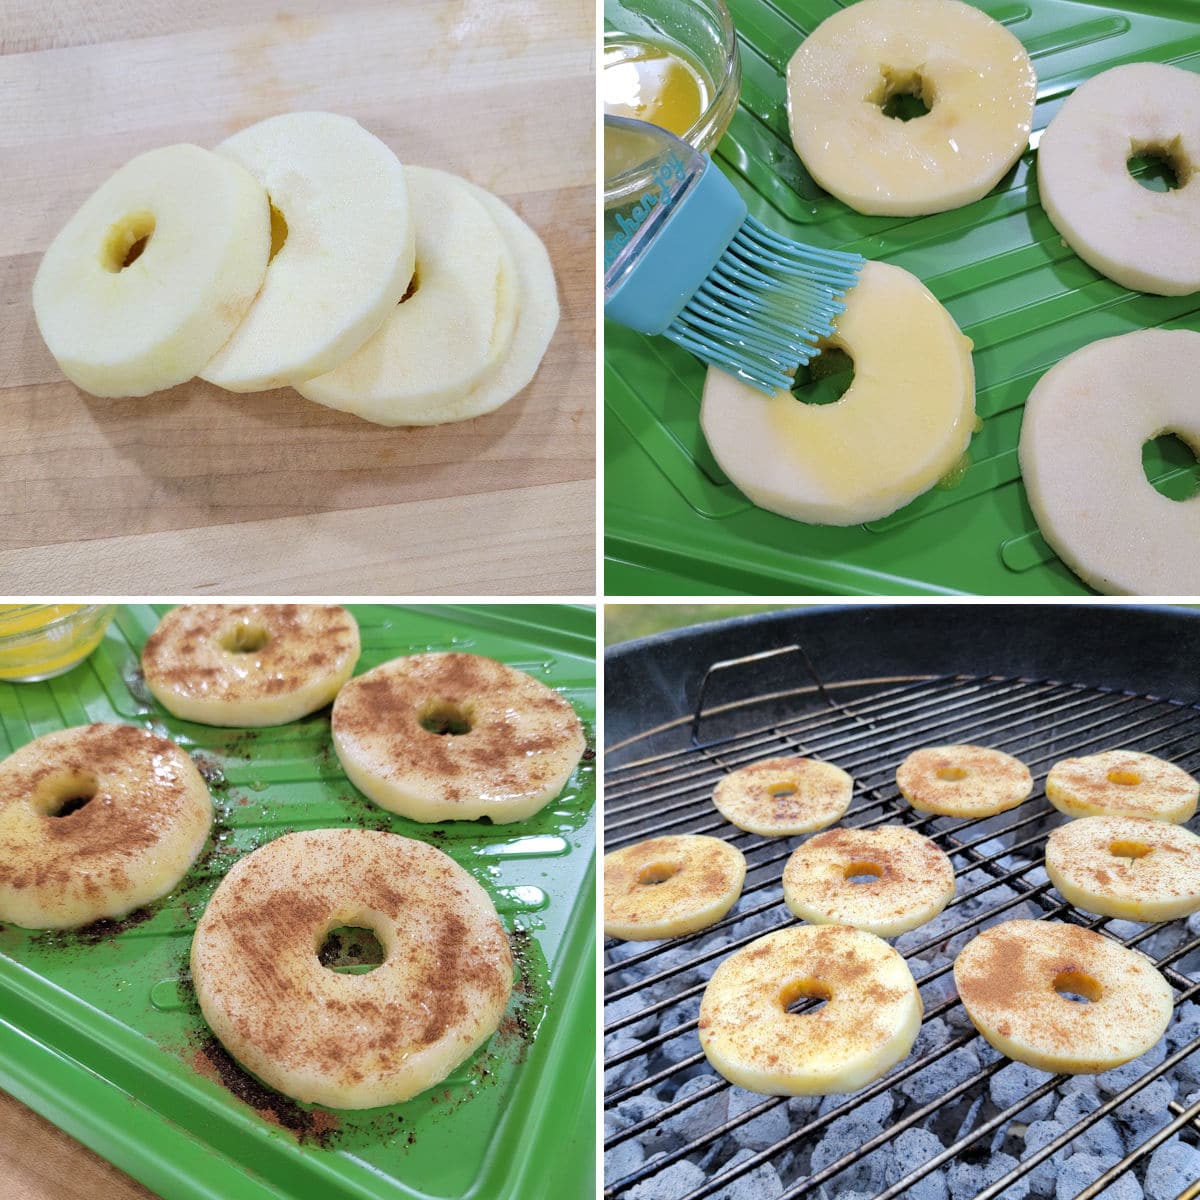 Preparing apples with butter and cinnamon, then grilling.